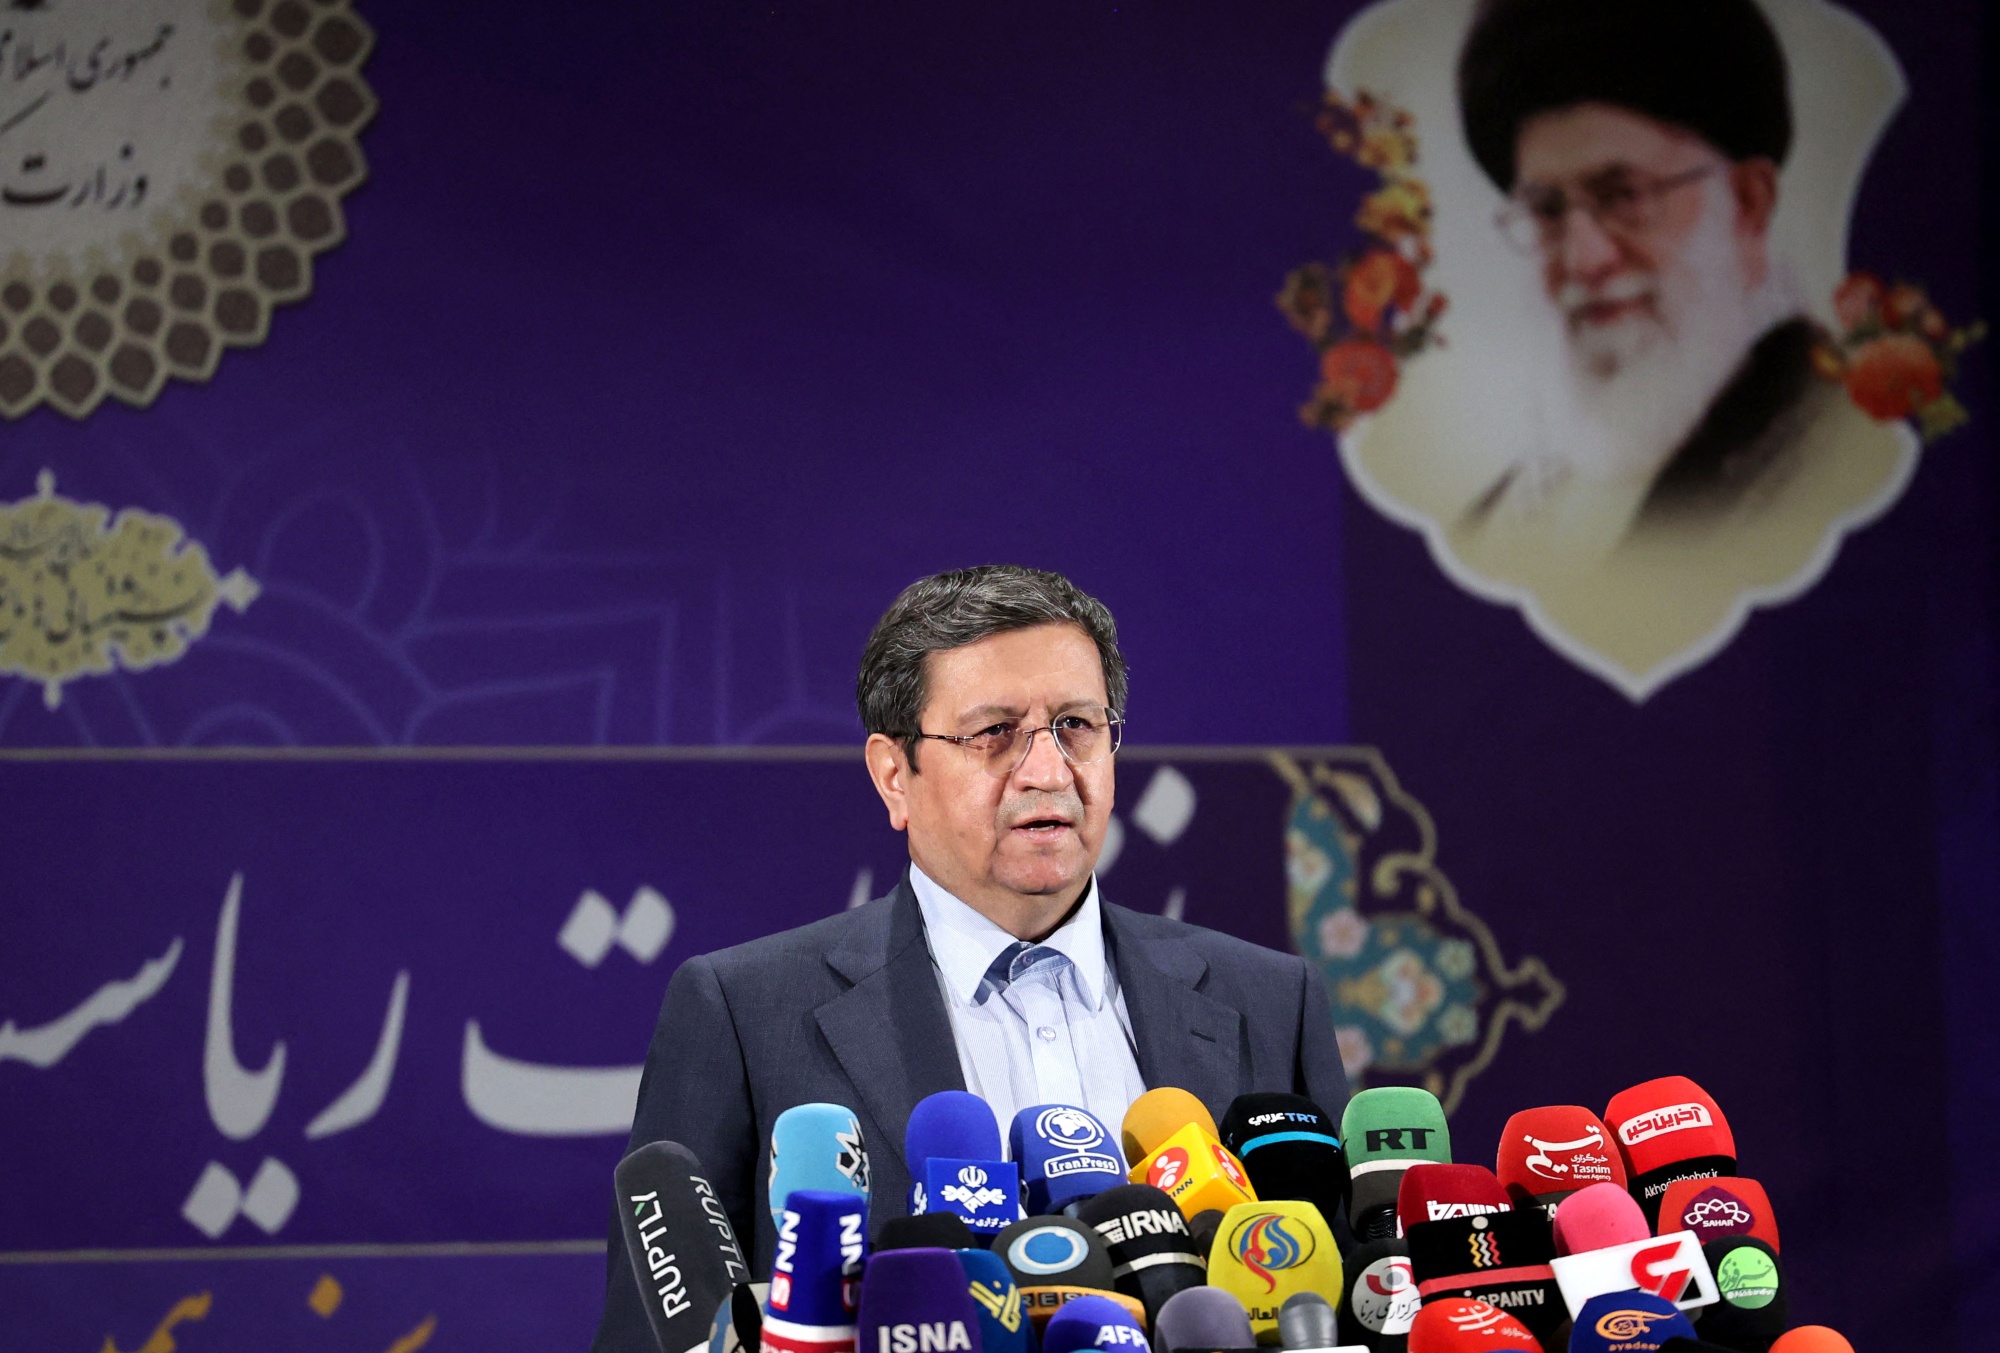 Abdolnasser Hemmati talks to journalists after registering his candidacy for the June presidential elections at the Interior Ministry in the capital Tehran, on 15 May 2021 (AFP)